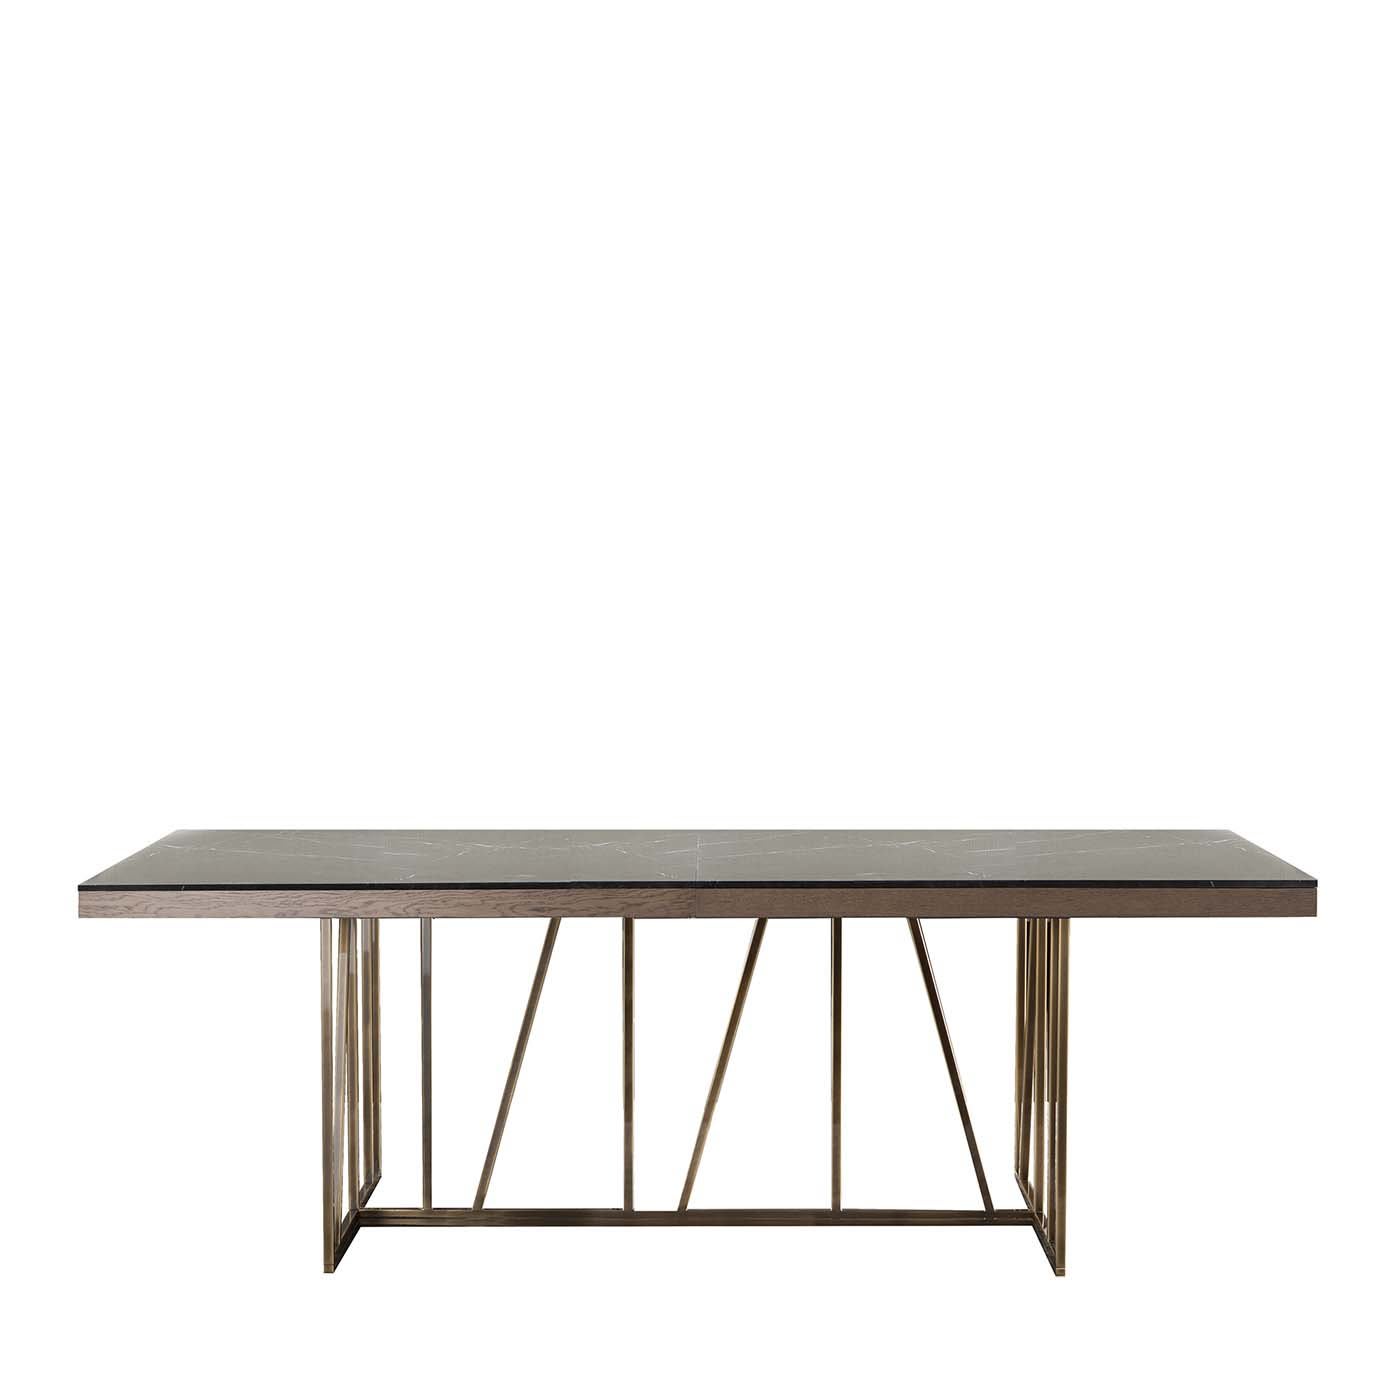 Slash Dining Table with Gray Saint Lauren Marble Top - Bamax